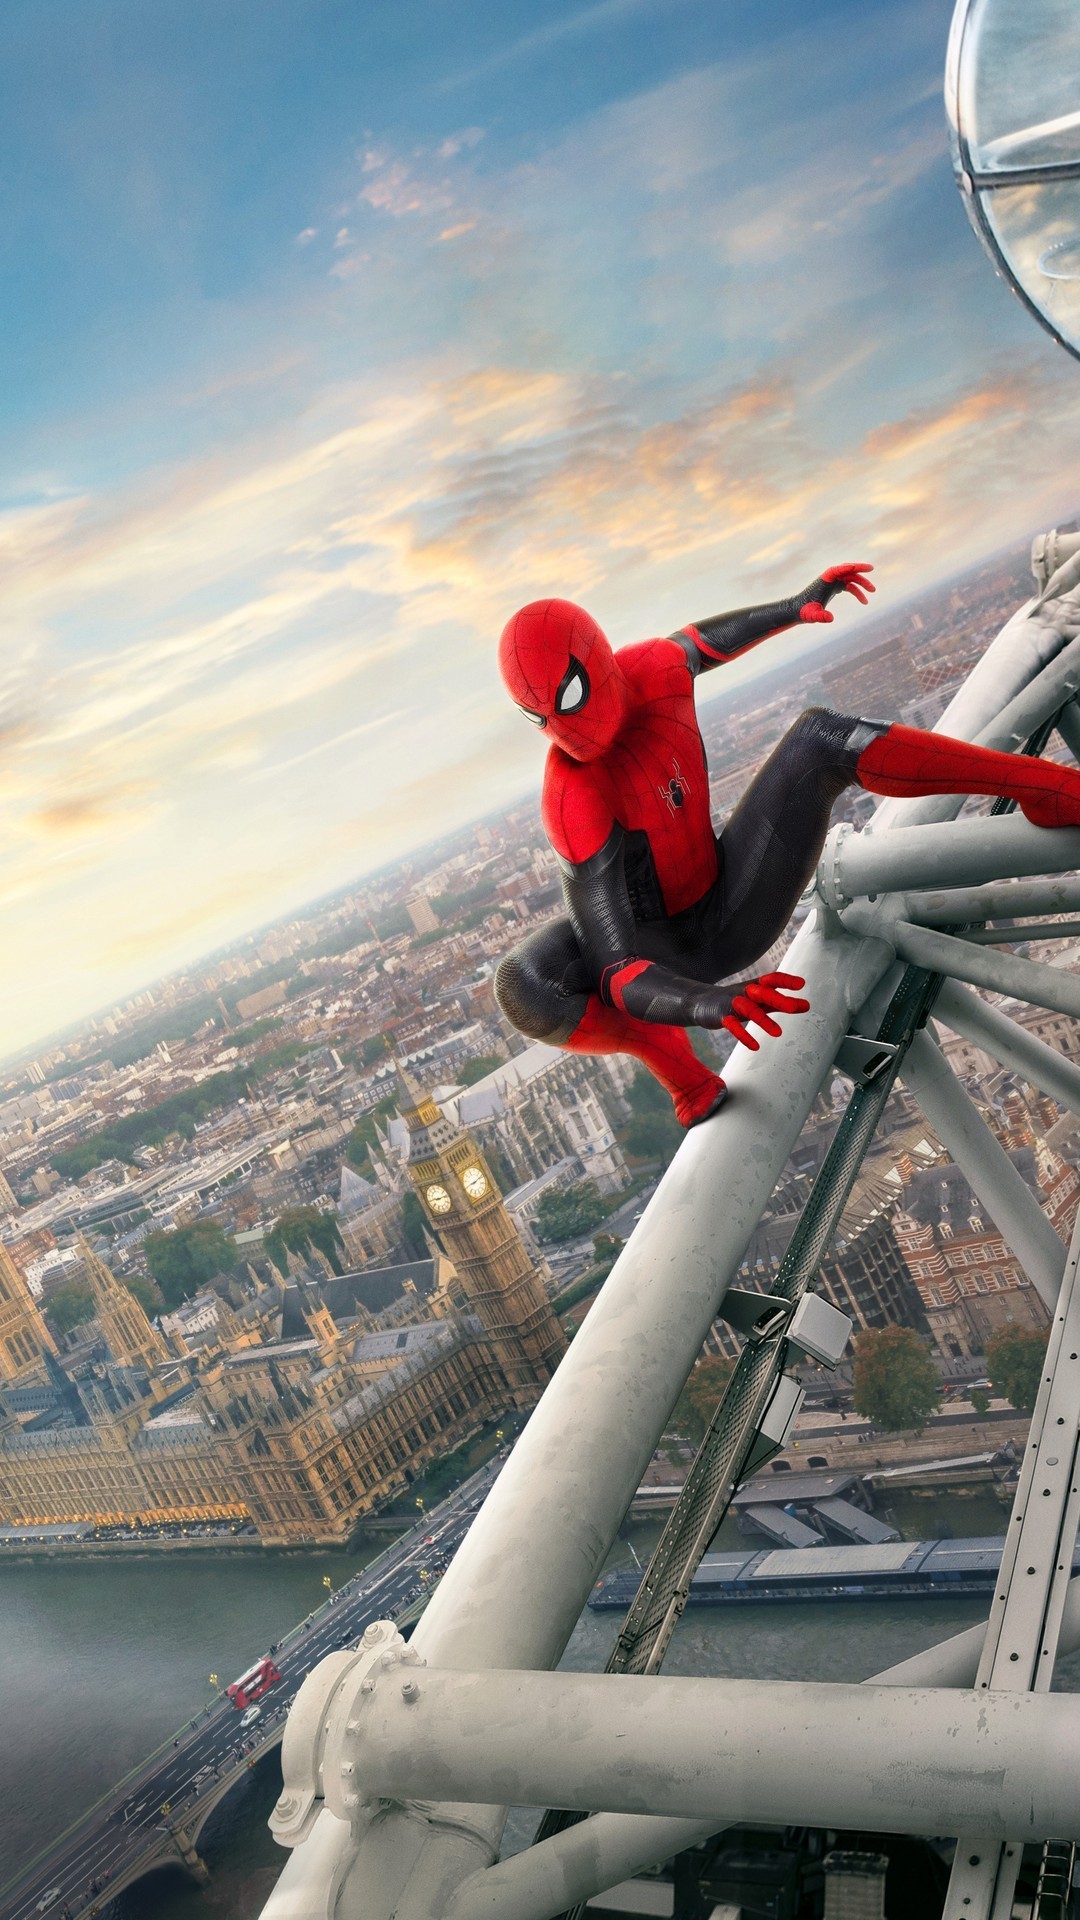 37+ Spider-Man: Far From Home Wallpapers on WallpaperSafari